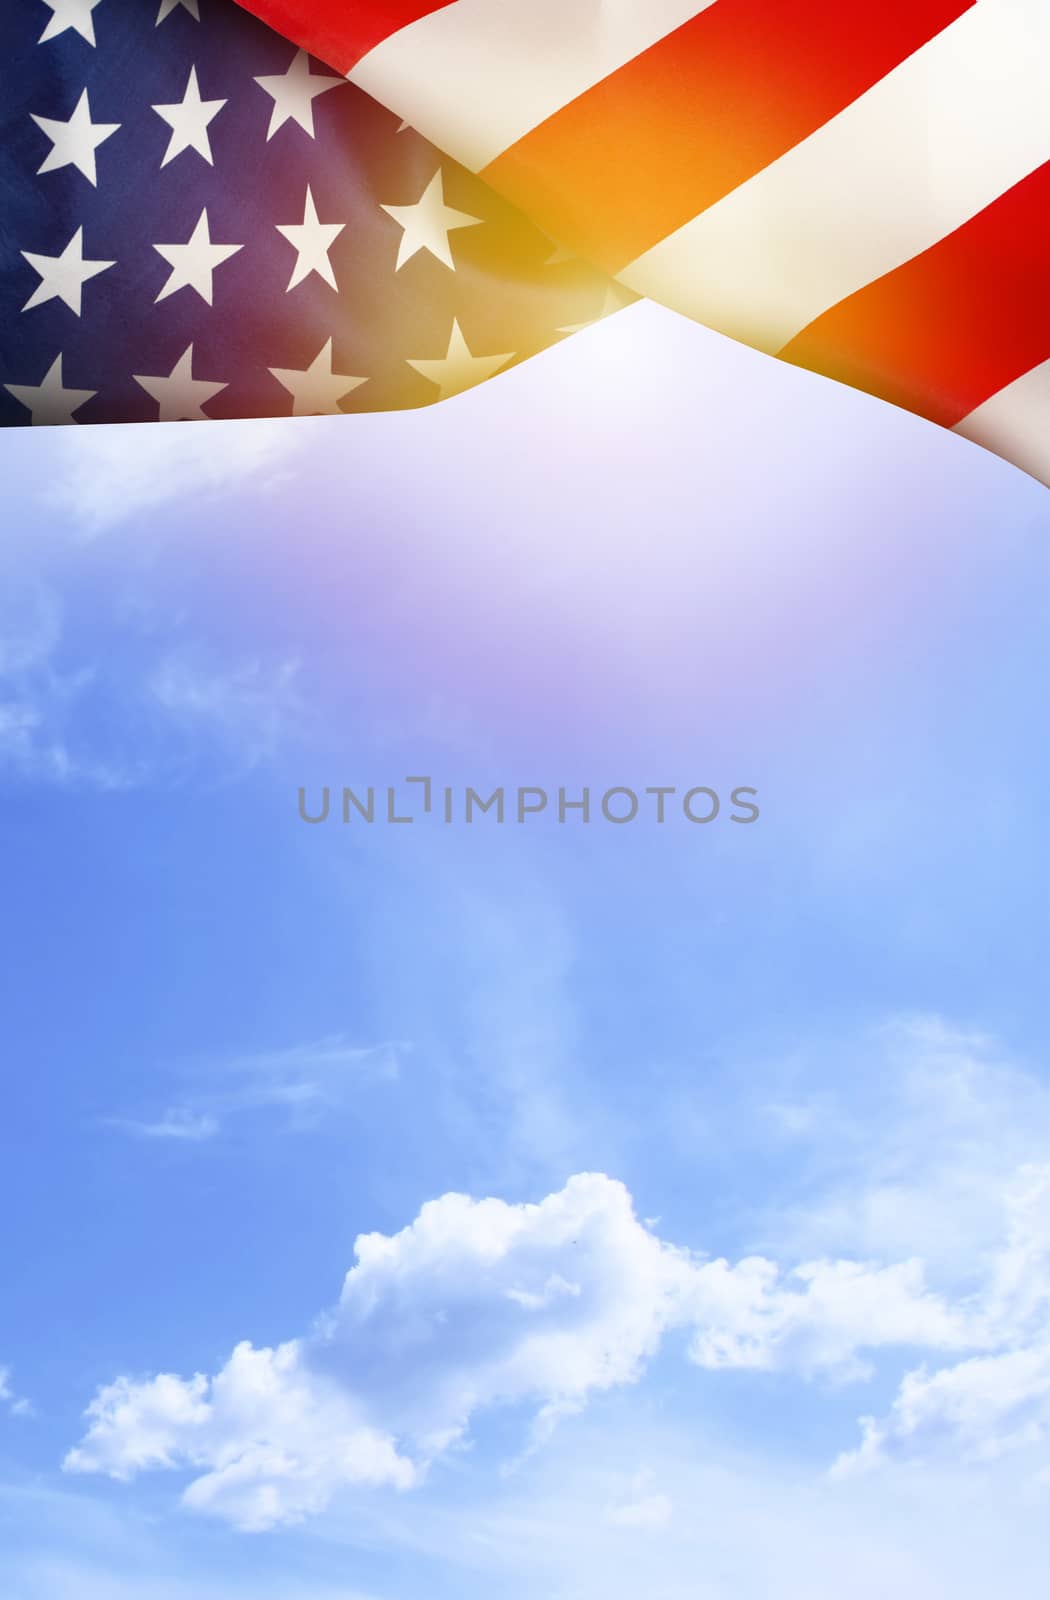 American flag on the background of the dawn sky by SlayCer